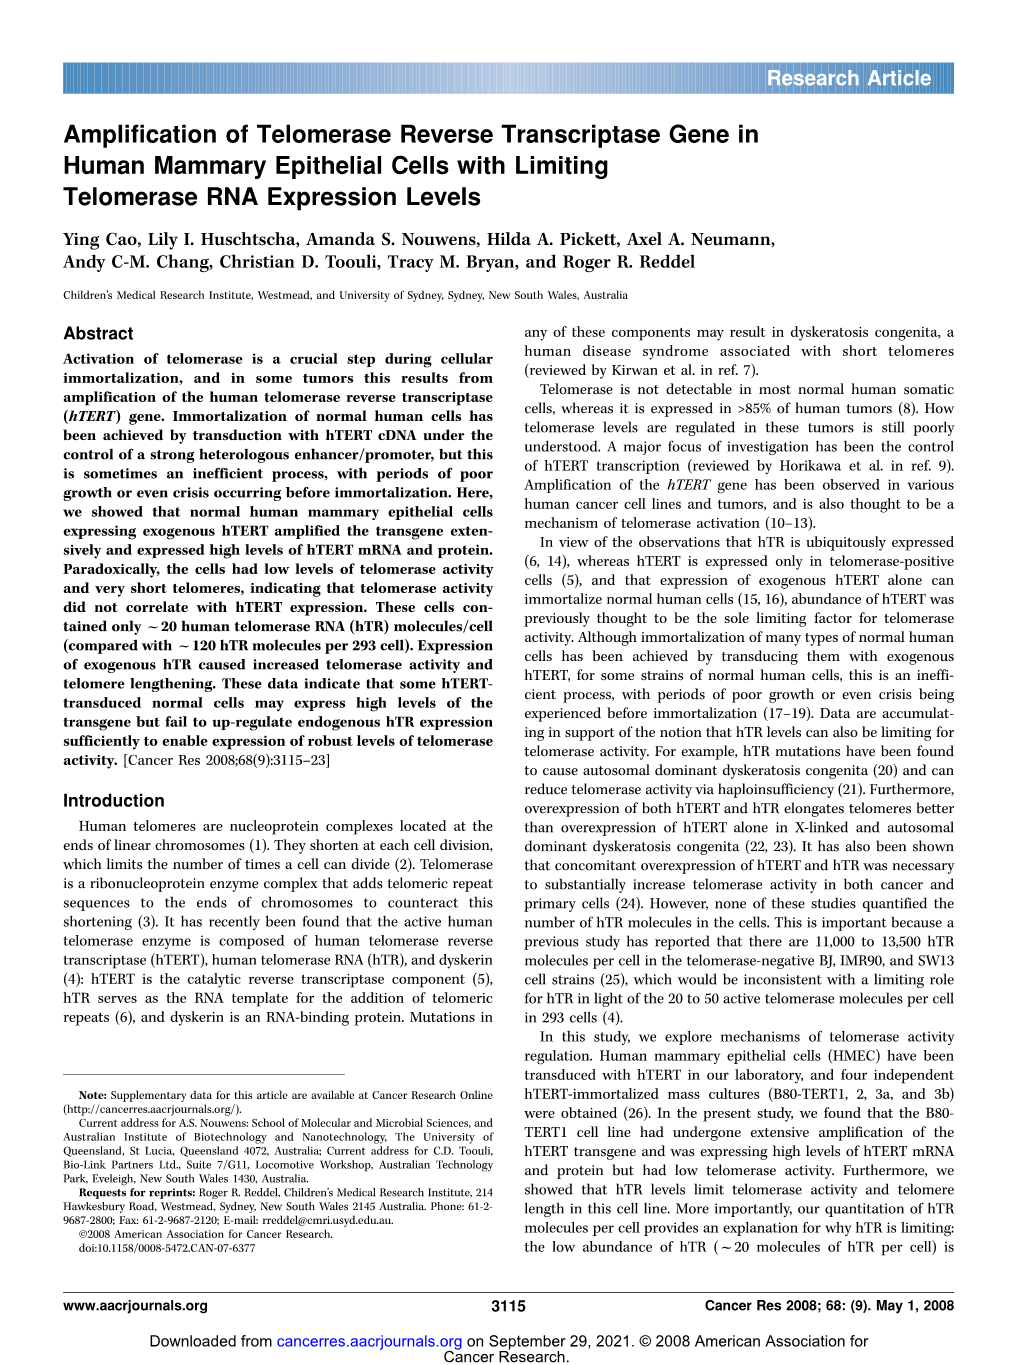 Amplification of Telomerase Reverse Transcriptase Gene in Human Mammary Epithelial Cells with Limiting Telomerase RNA Expression Levels